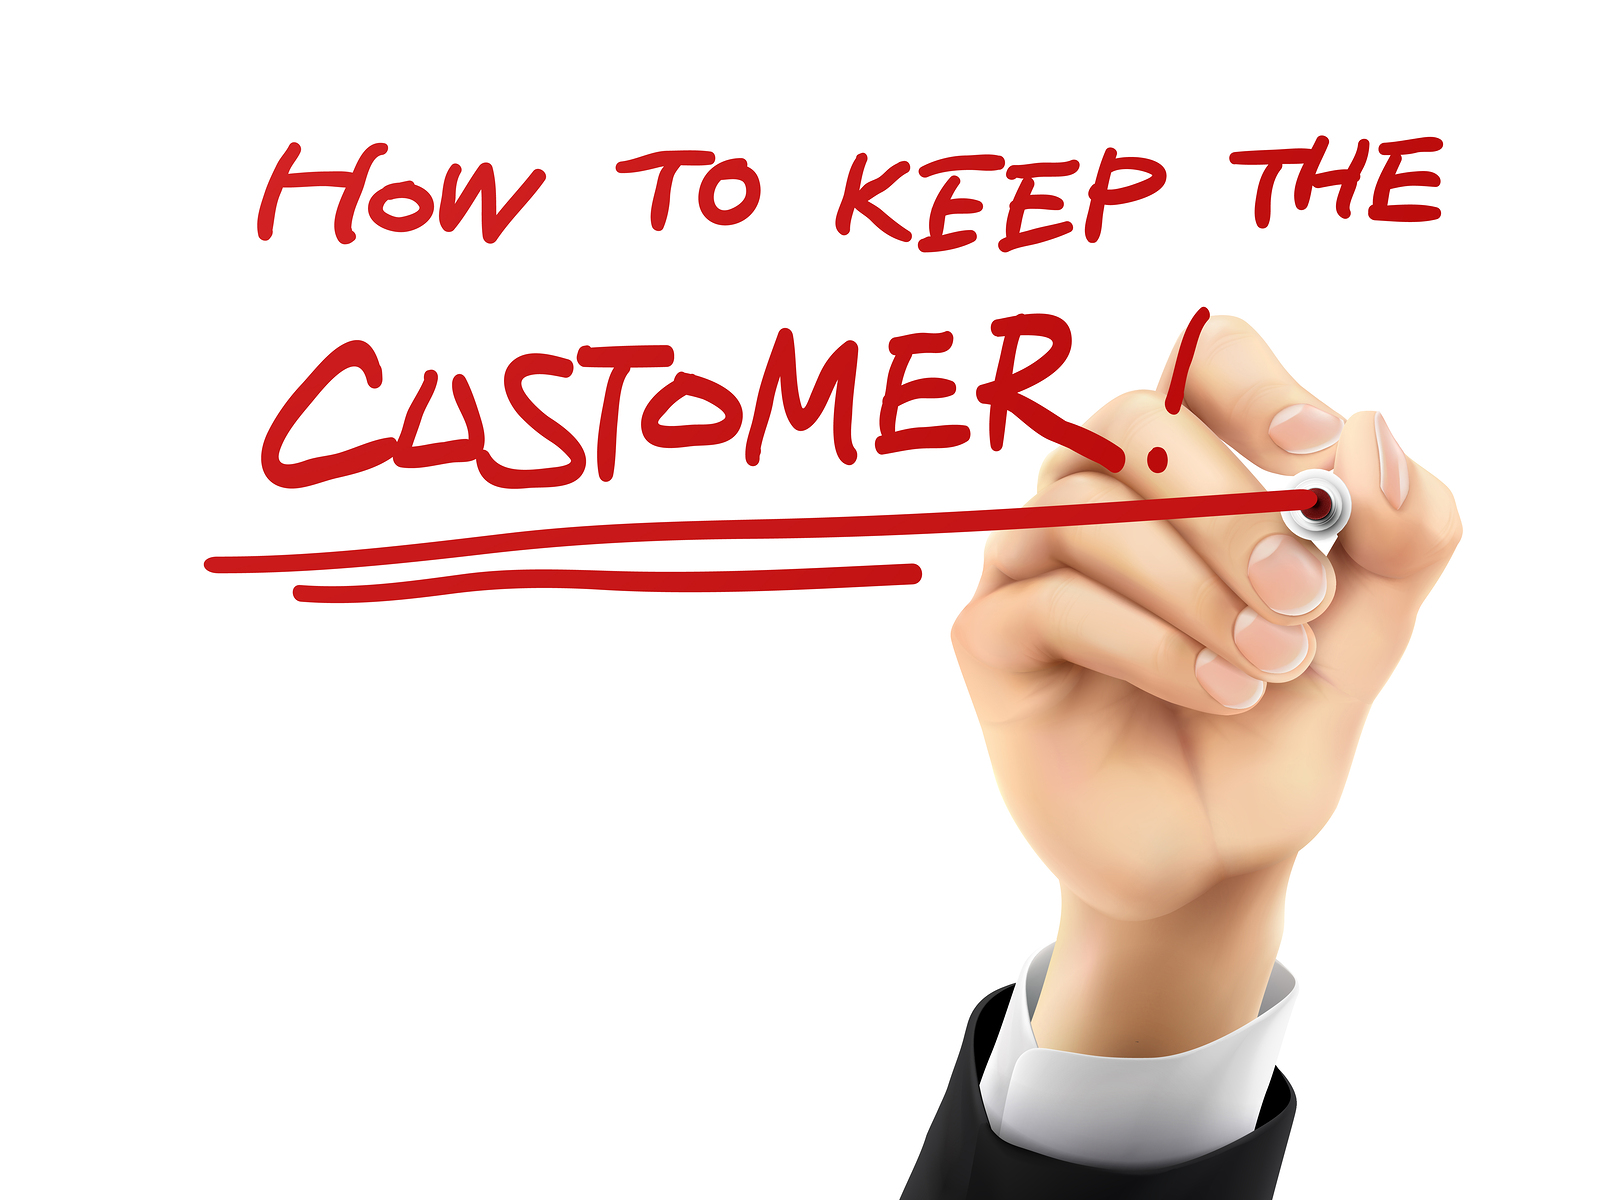 5 Gestures for Creating a Lasting Impression on Customers